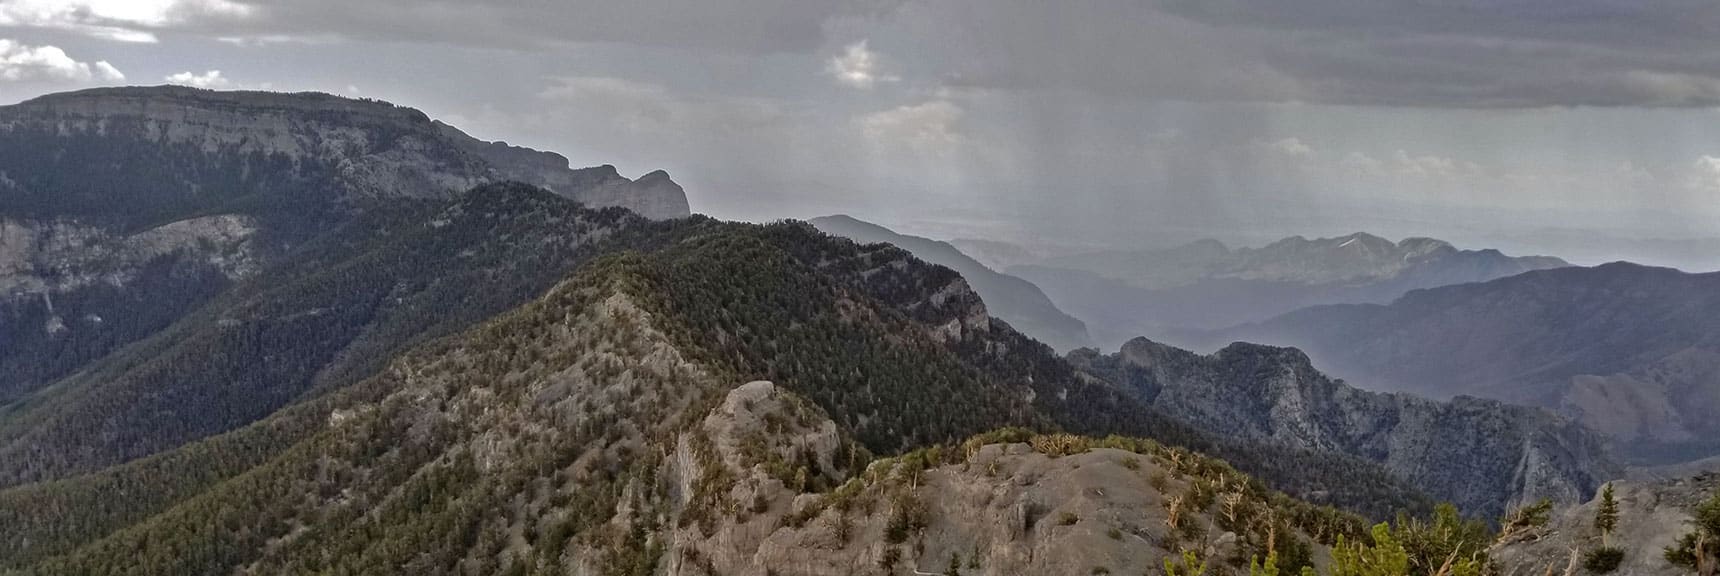 Rain Streaming from the Clouds on the Horizon Viewed Down Kyle Canyon from Lee Peak Summit. | Lee Peak Summit via Lee Canyon Mid Ridge | Mt. Charleston Wilderness | Spring Mountains, Nevada